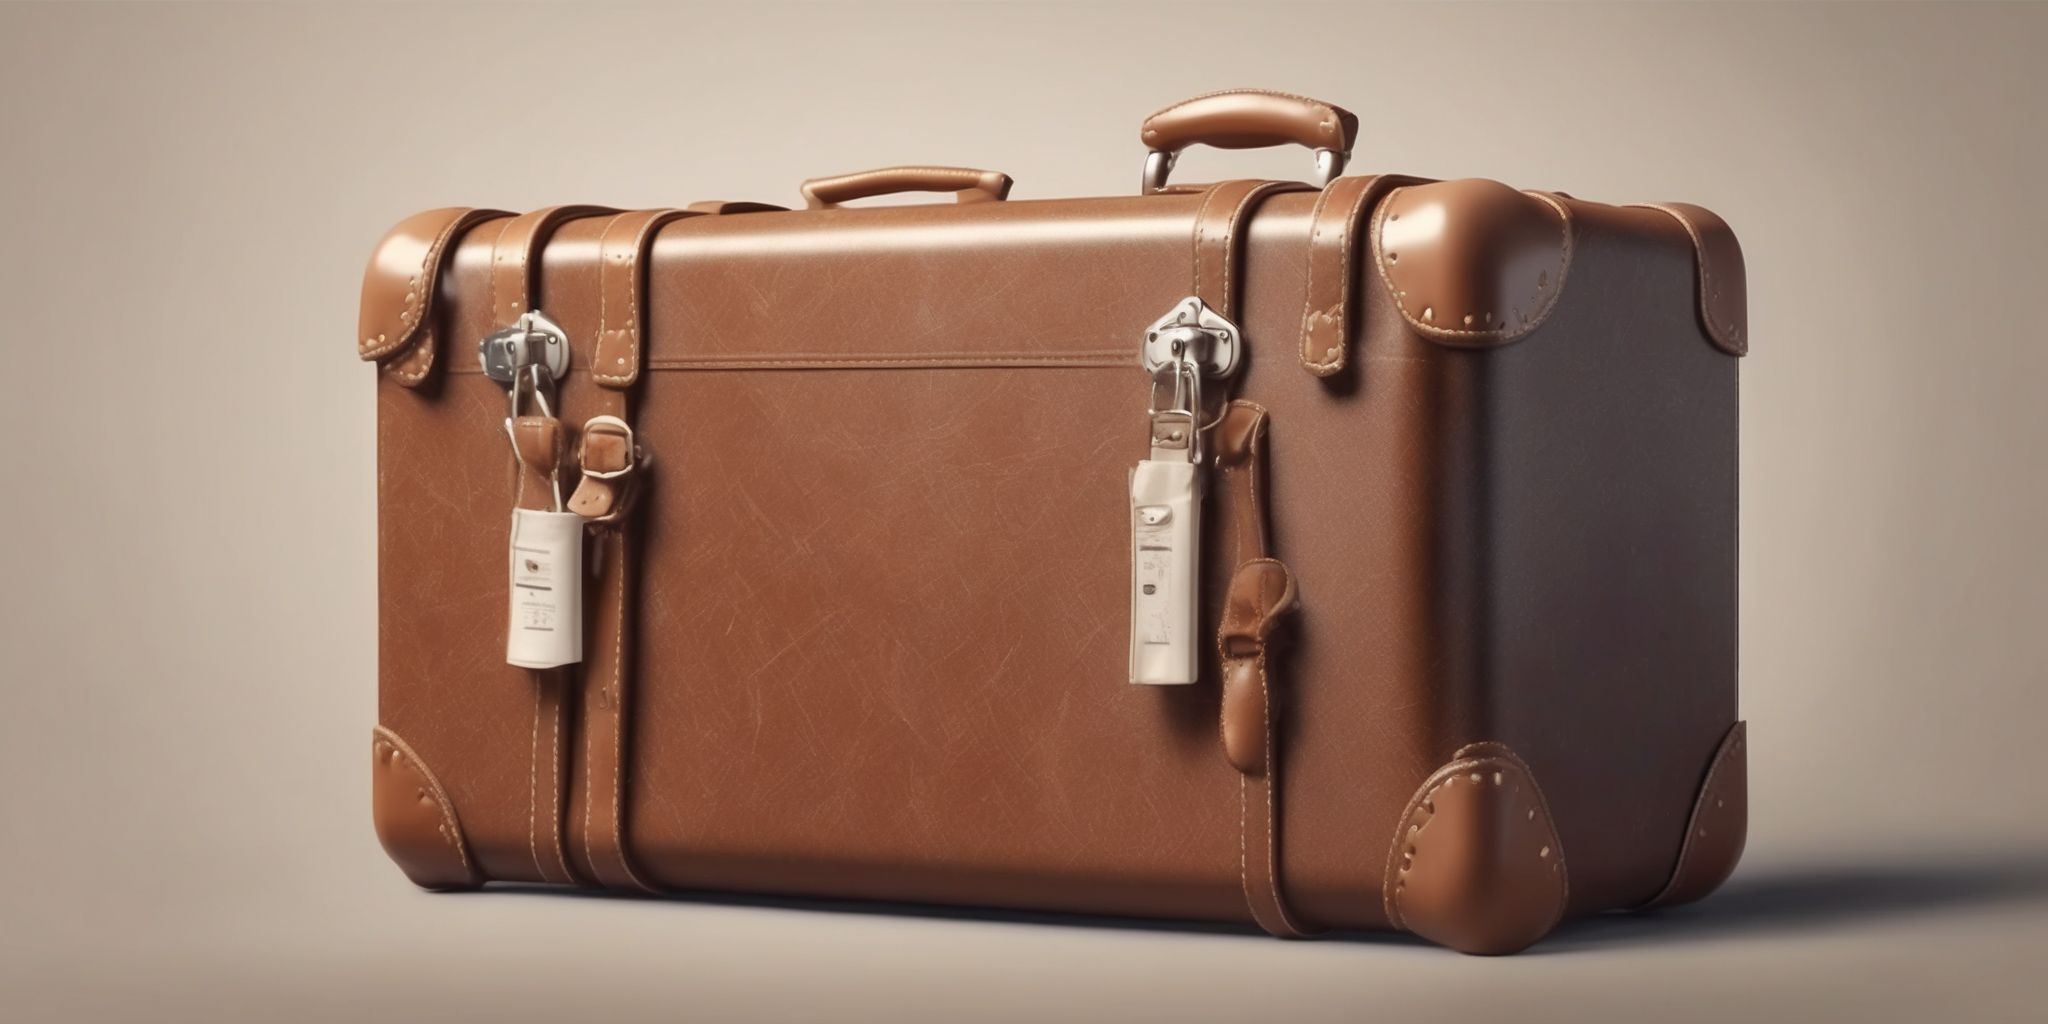 Suitcase  in realistic, photographic style